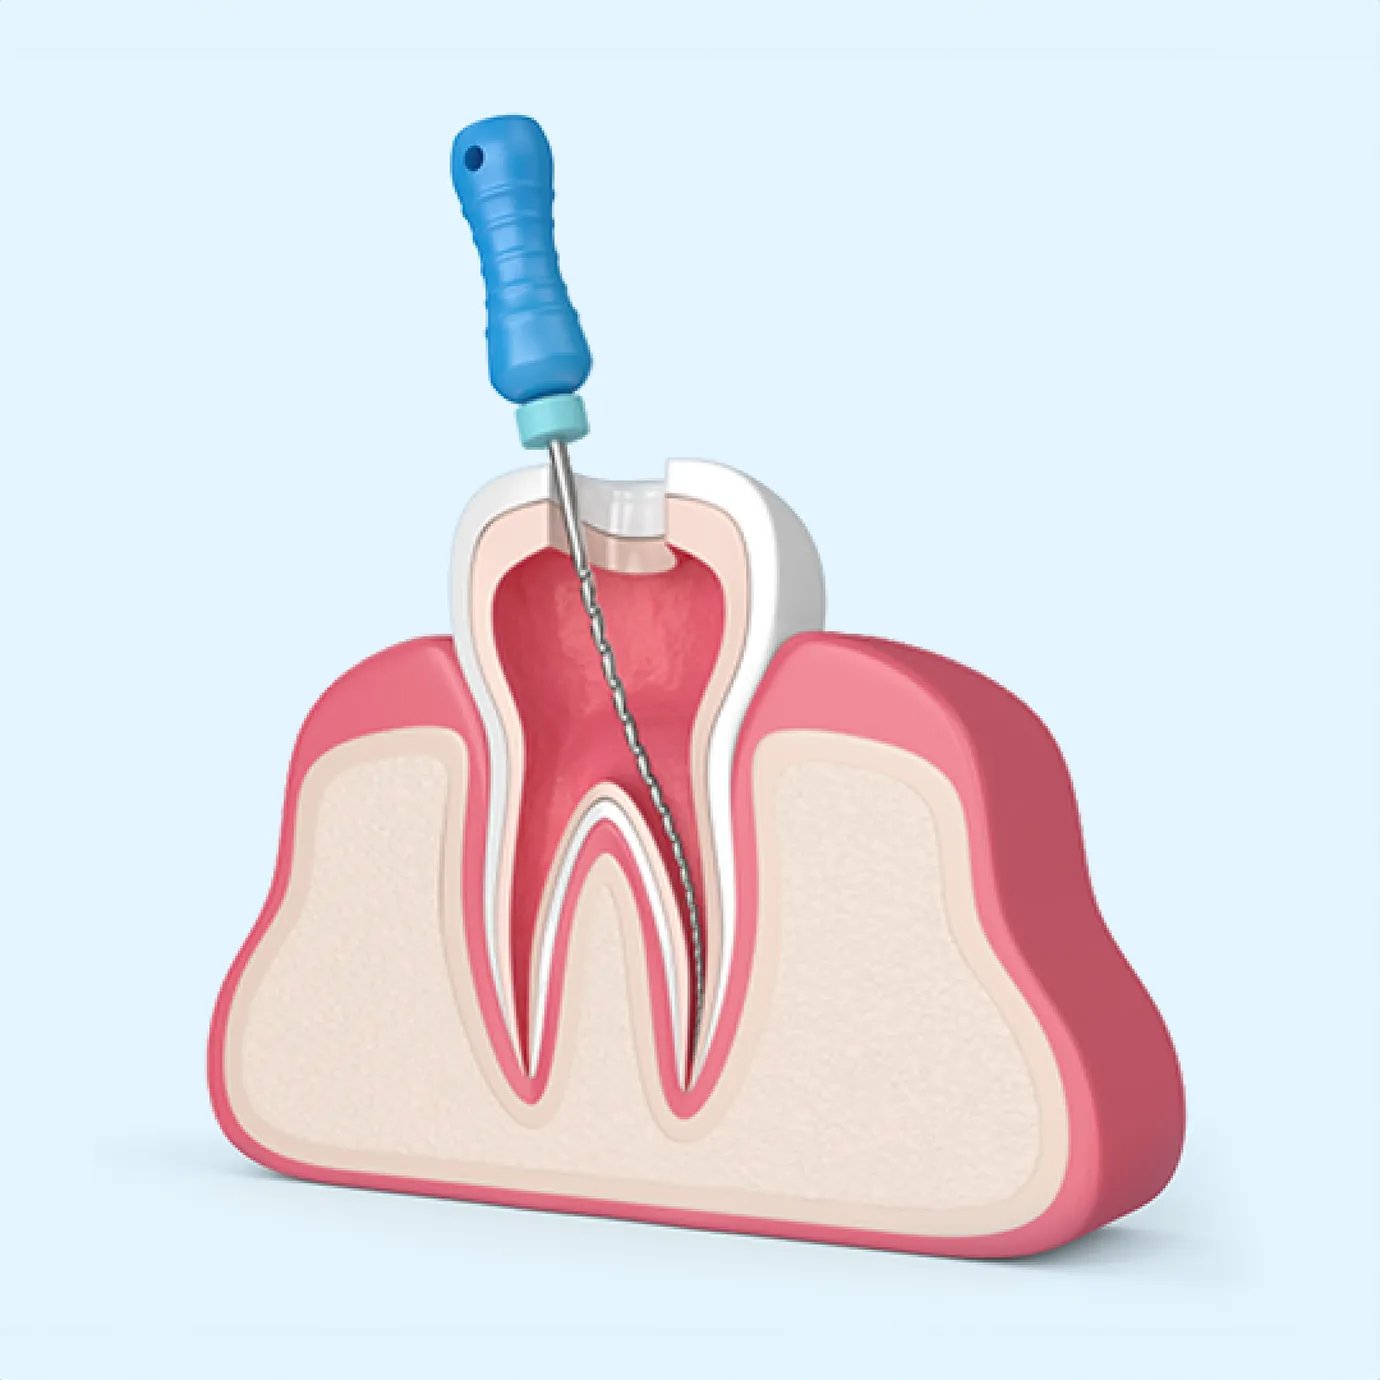 Root canal treatment for dental abscess